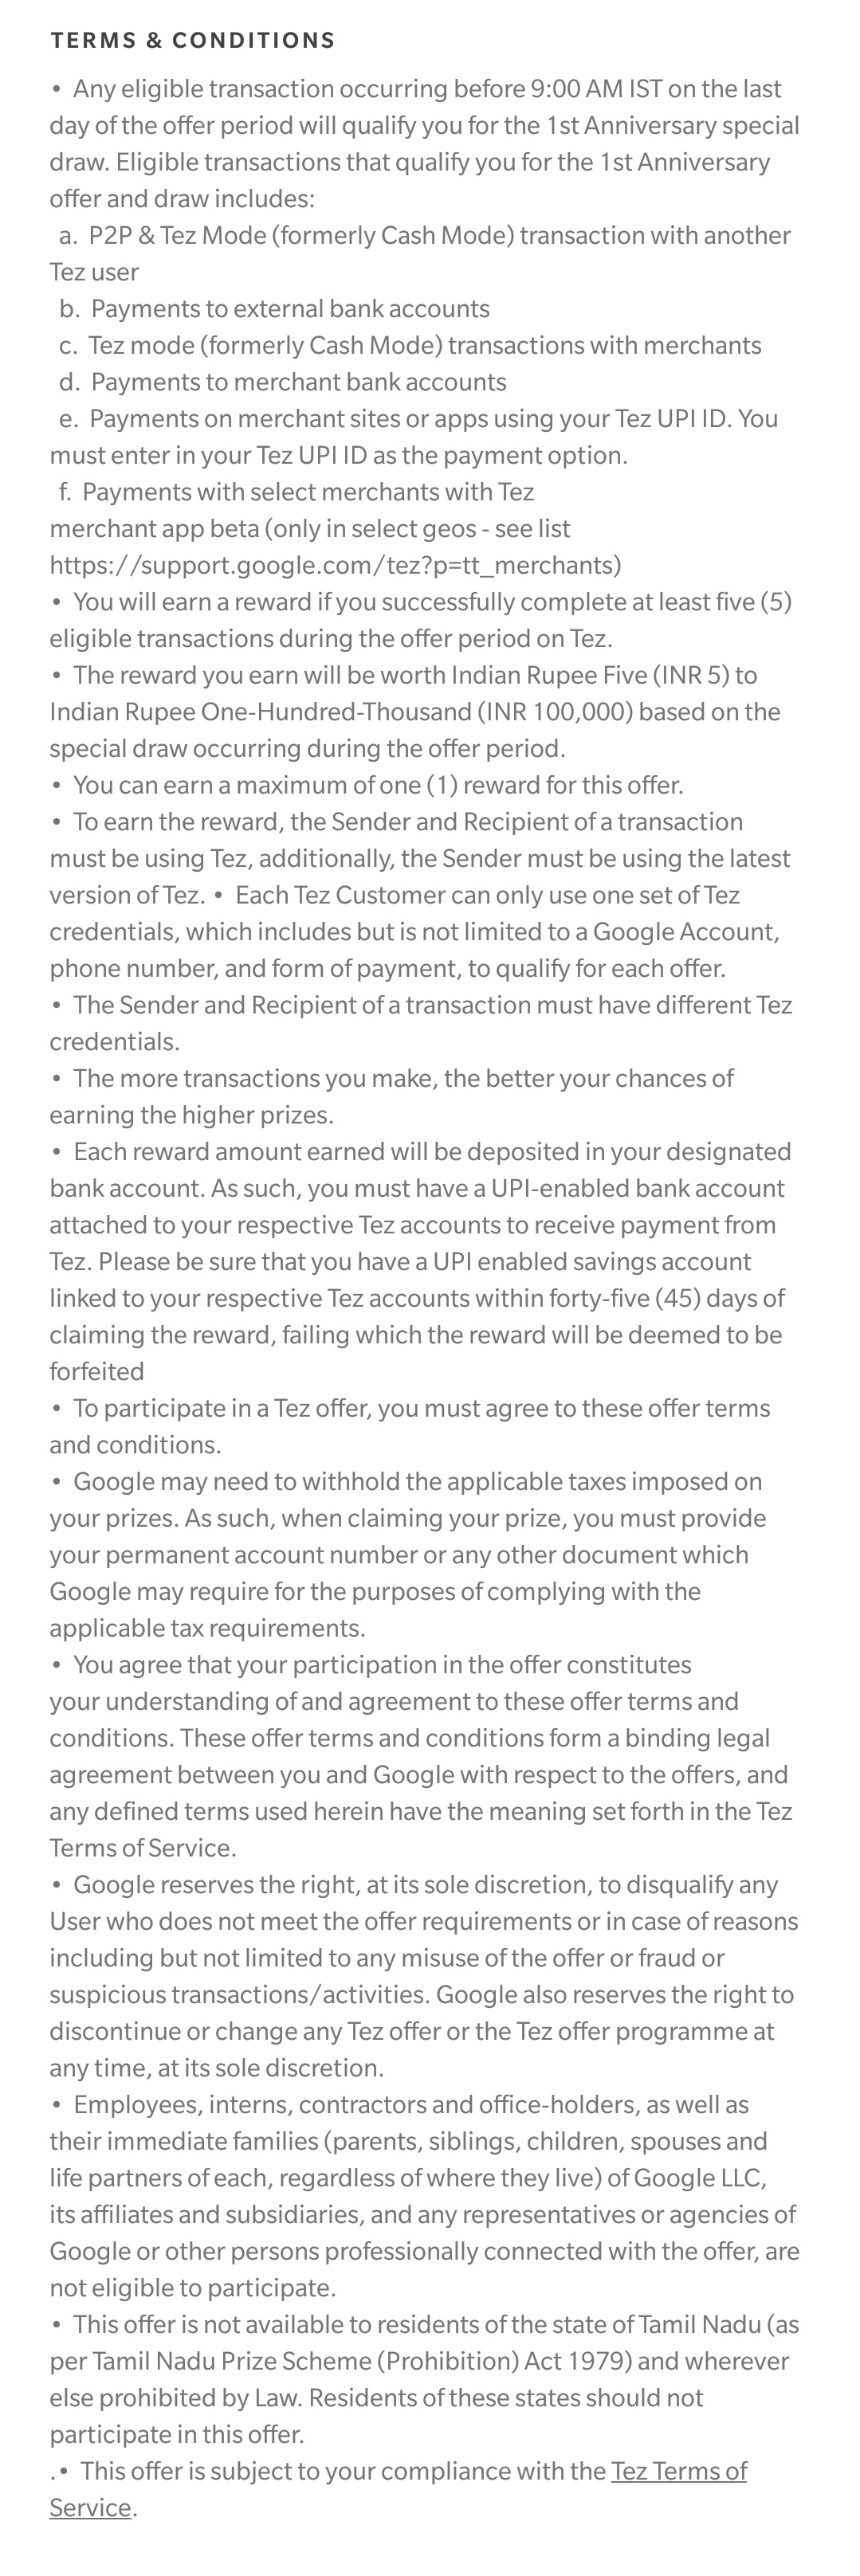 Tez 1st Anniversary Offer Terms and Conditions